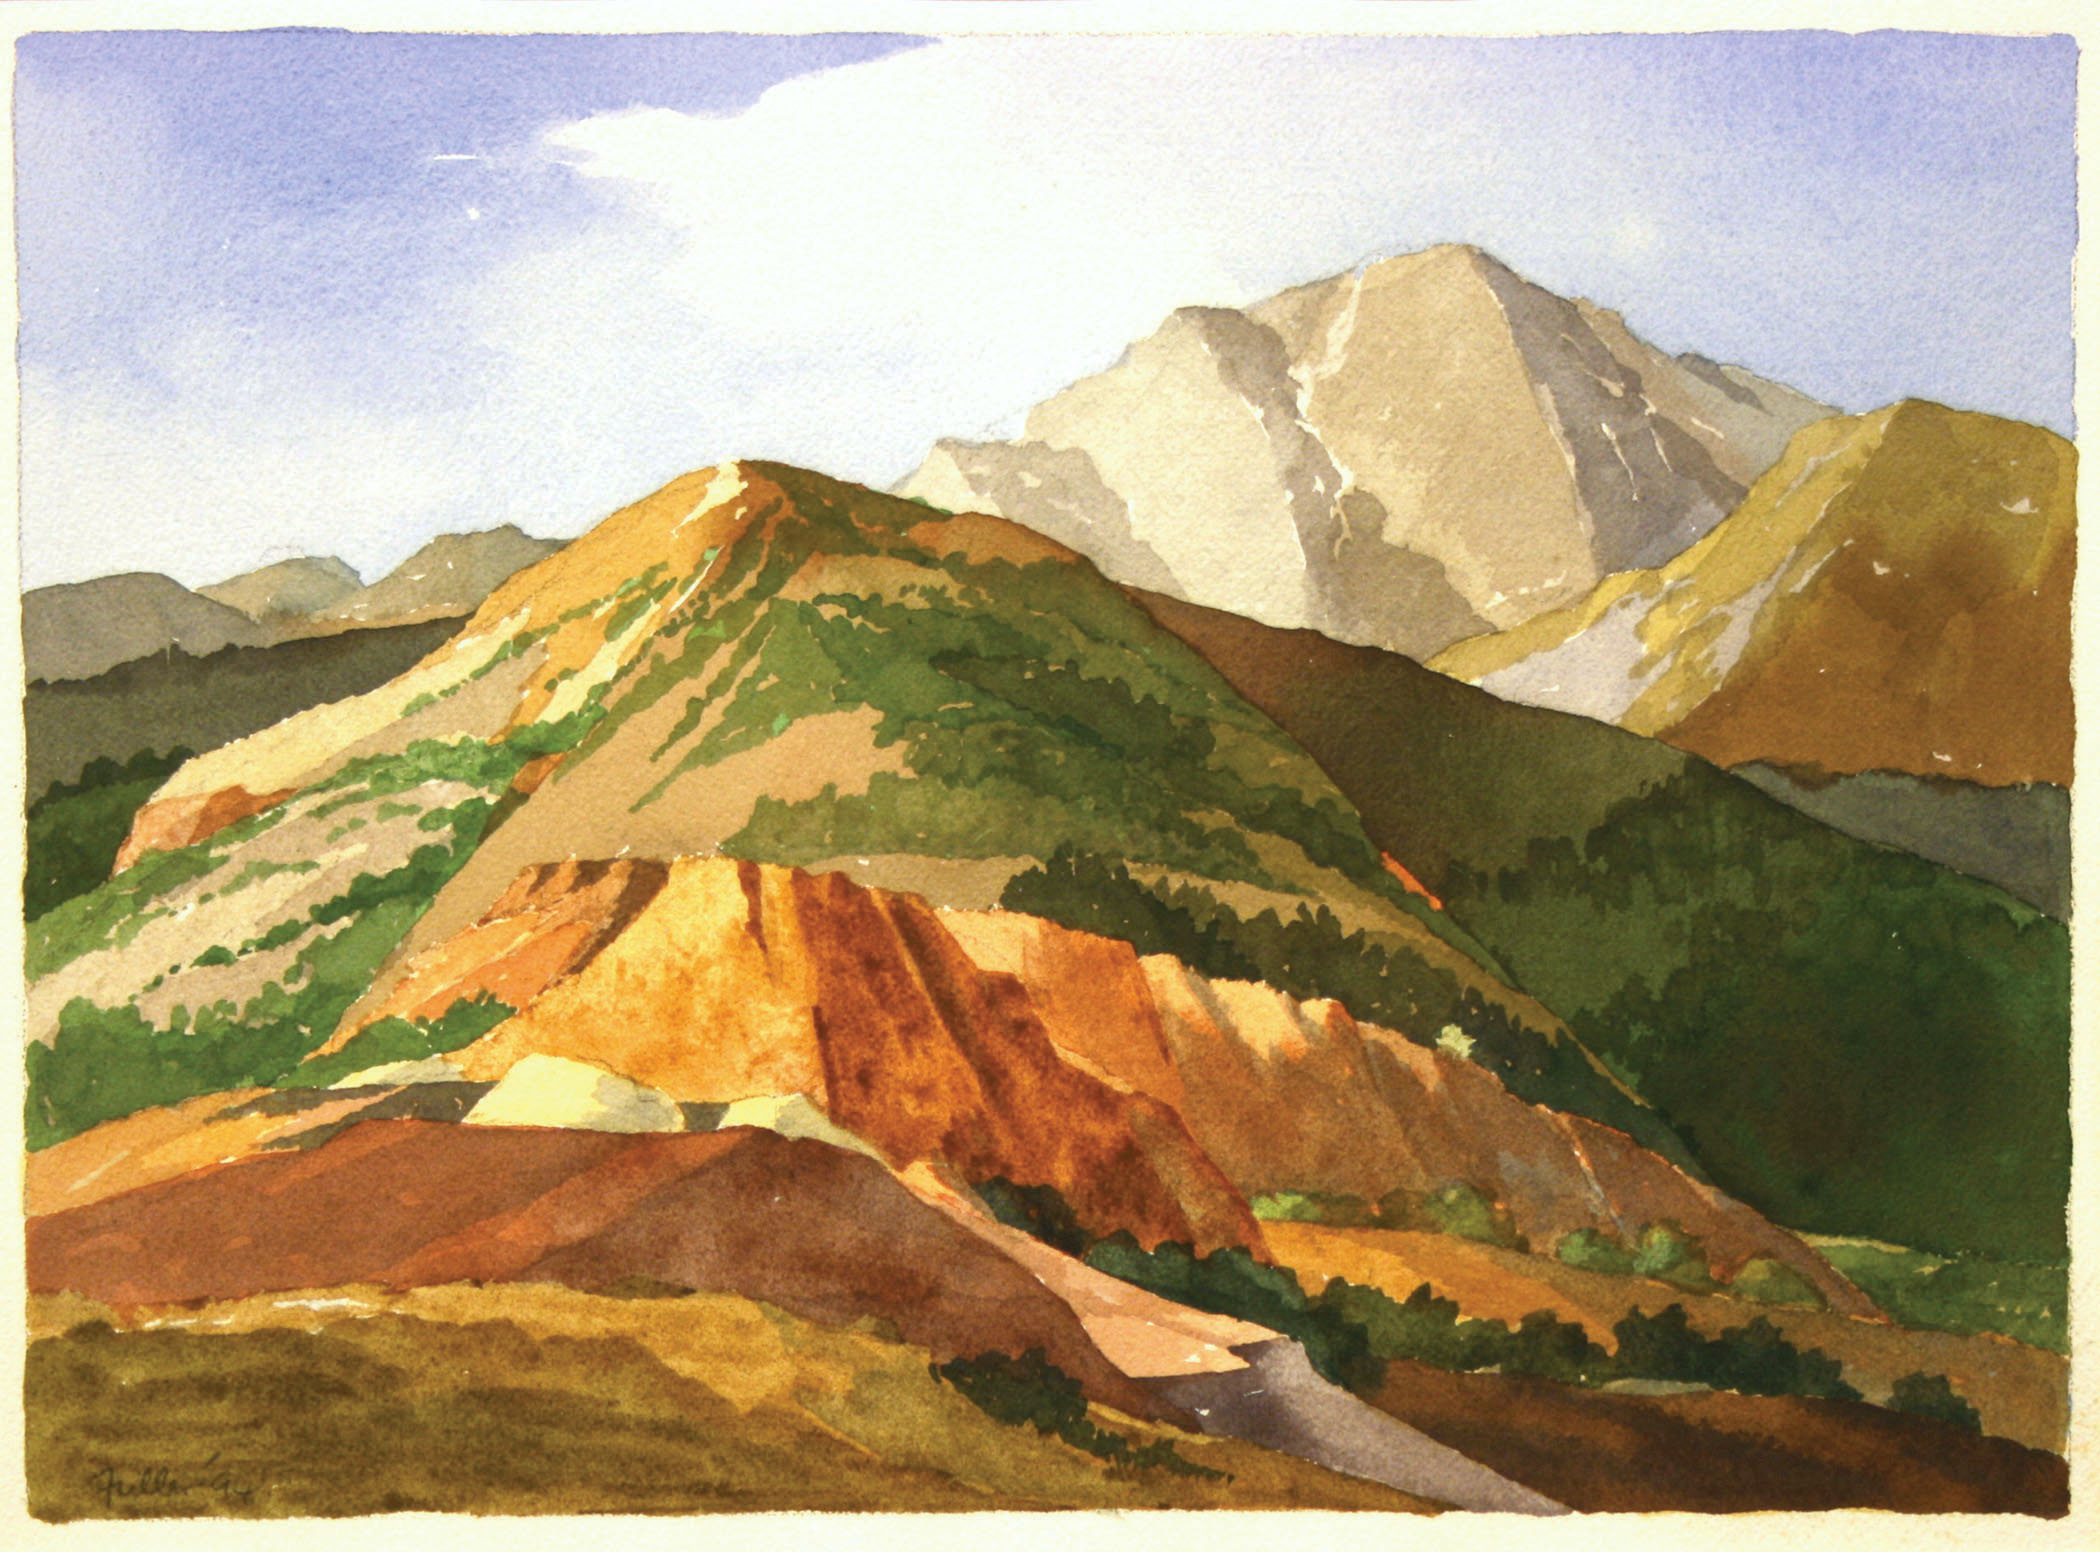 James Fuller, Untitled (from the Zion series), 1998, watercolor on paper. Collection of Steve Comba.